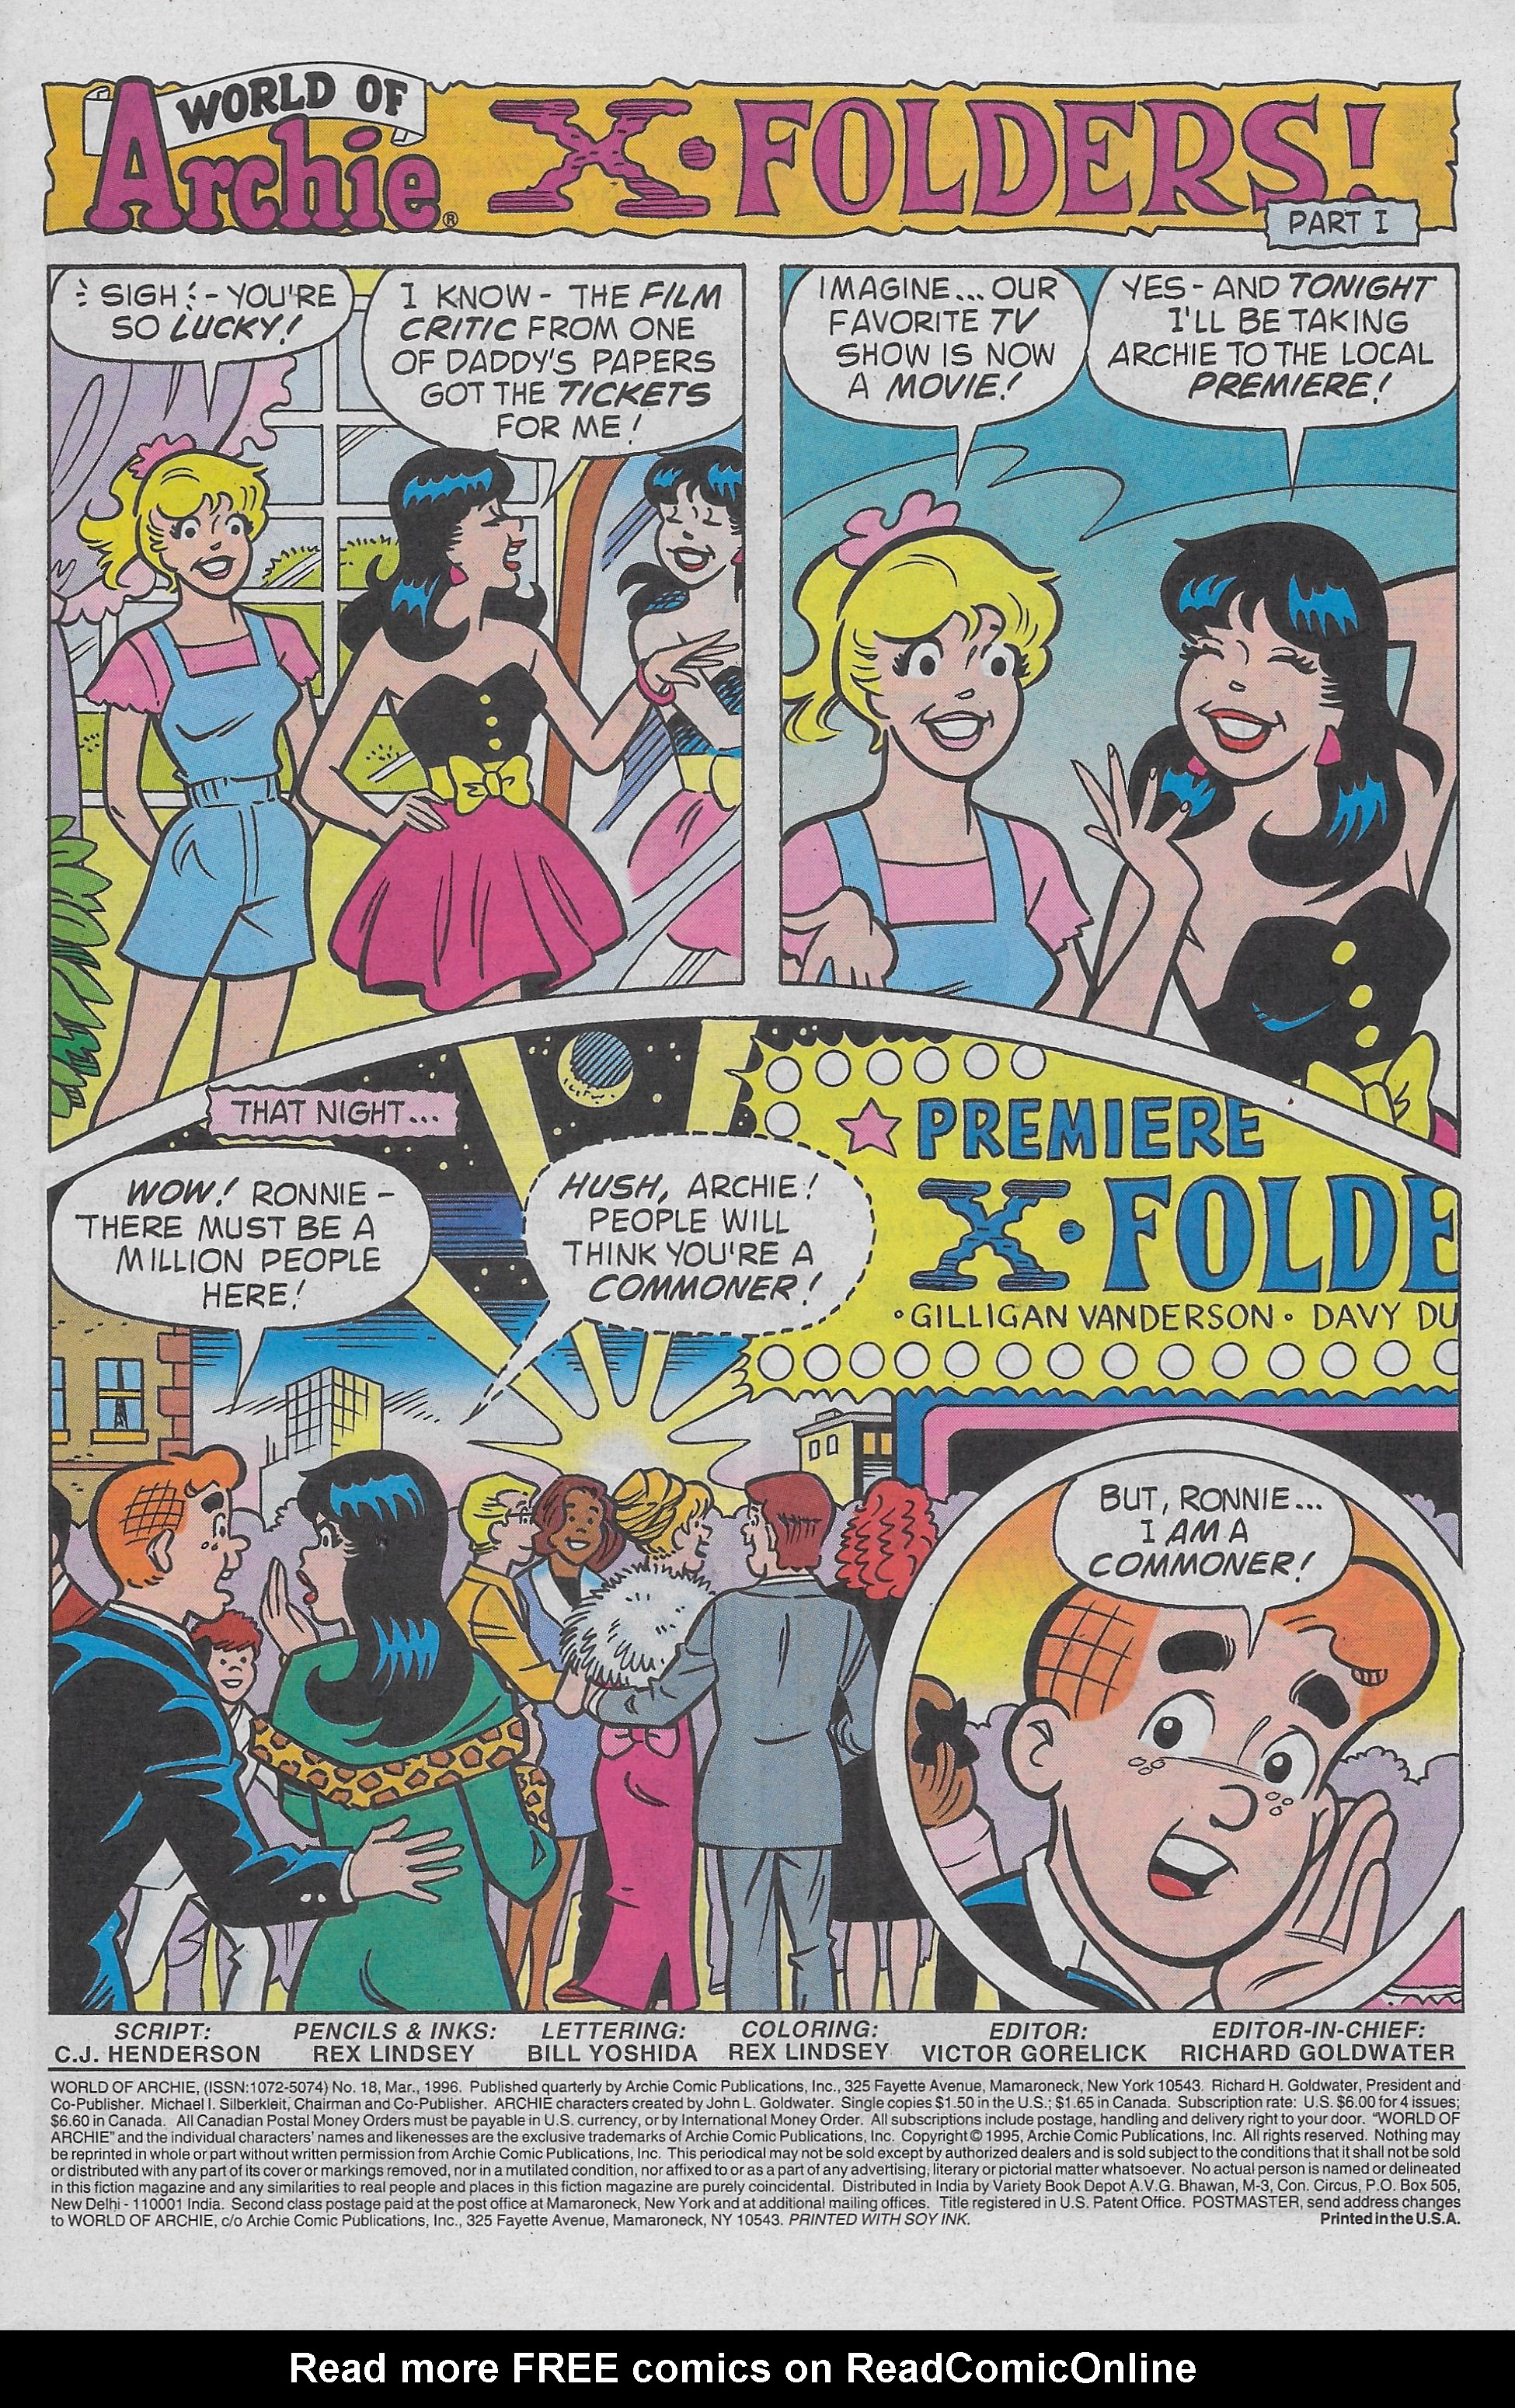 Read online World of Archie comic -  Issue #18 - 3